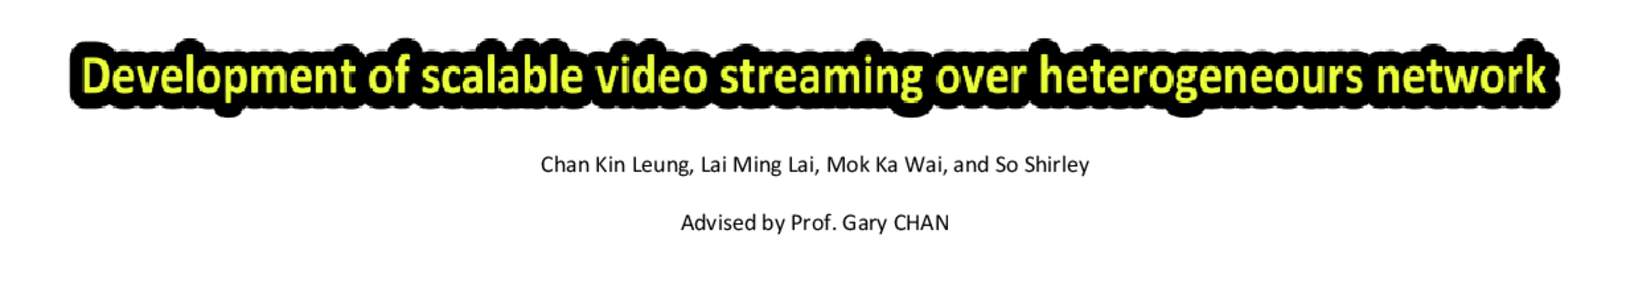 Chan Kin Leung, Lai Ming Lai, Mok Ka Wai, and So Shirley Advised by Prof. Gary CHAN Recently, TV broadcasting has been widely adapted on different platforms, including desktops and smart phones. To provide a high reliab